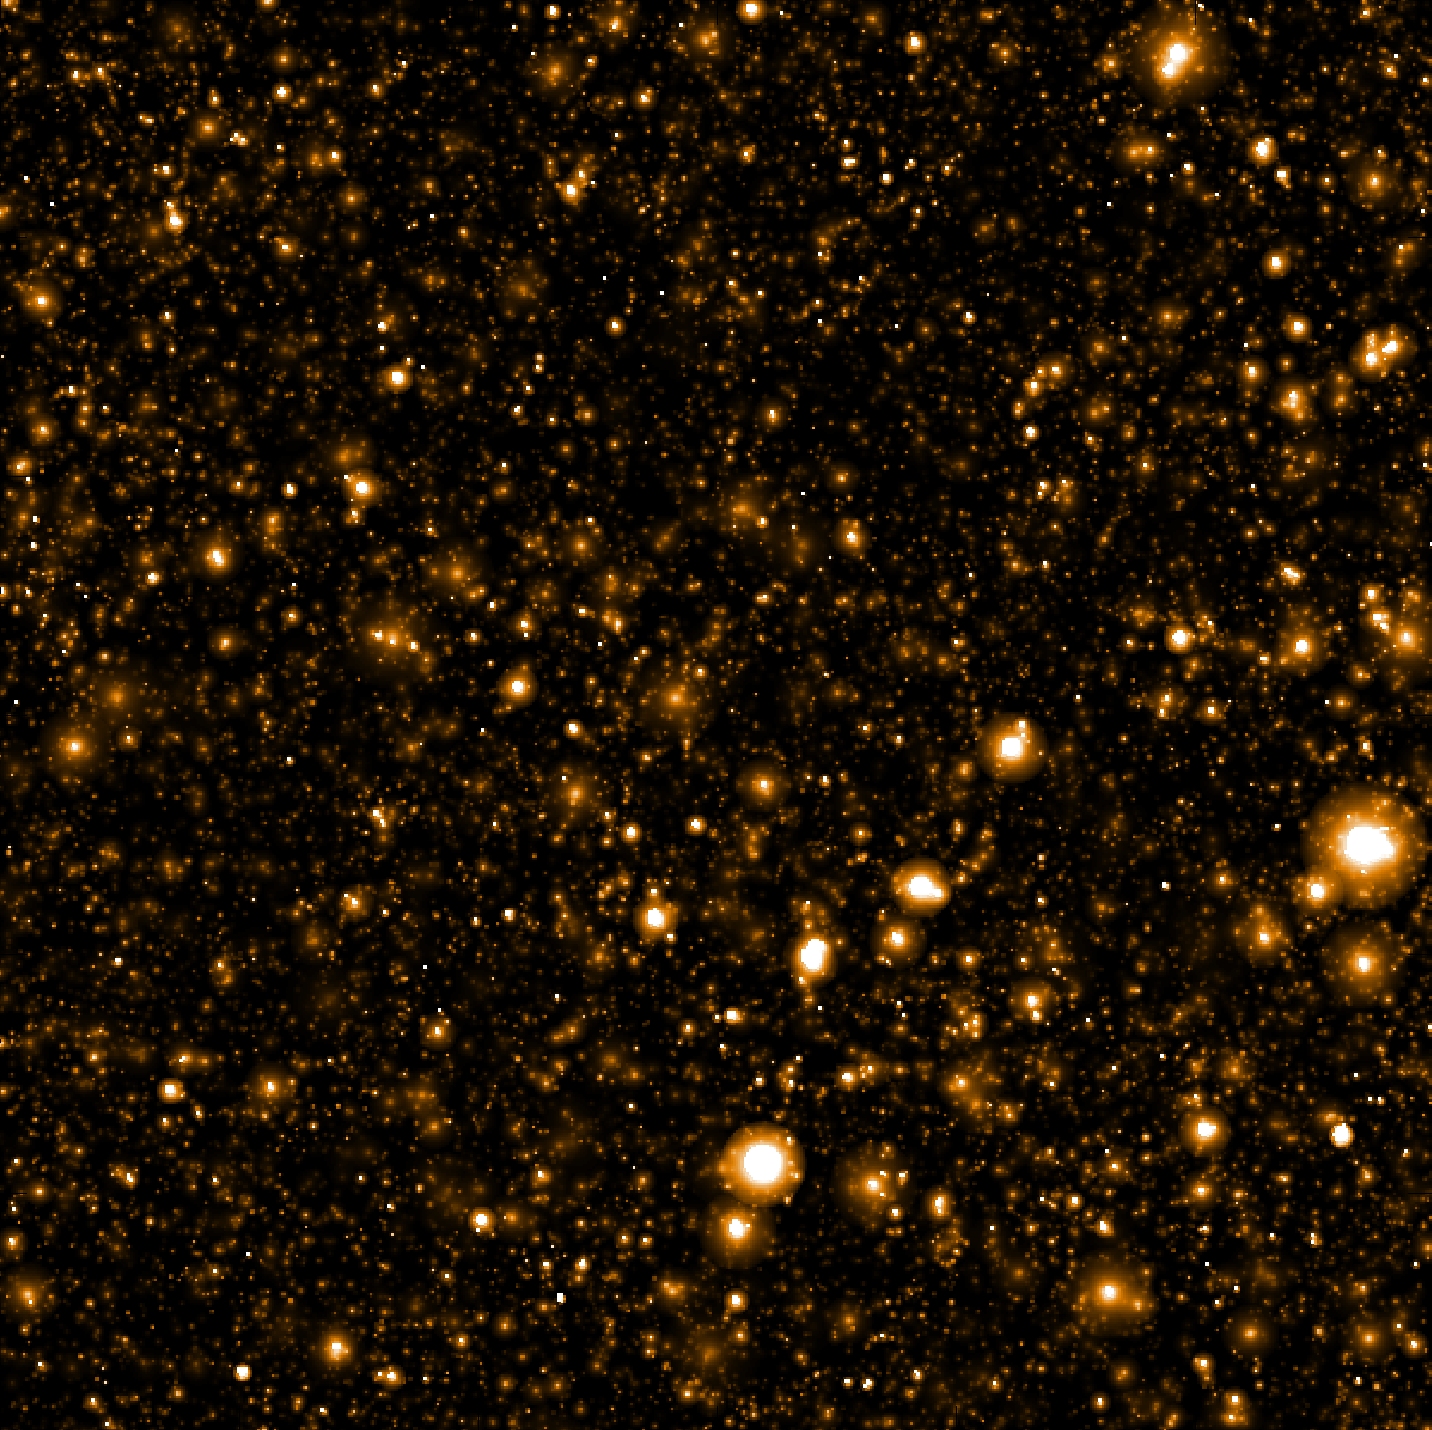 A simulation of the Sunyaev-Zel'dovich effect in a 3x3 degree section of the sky.